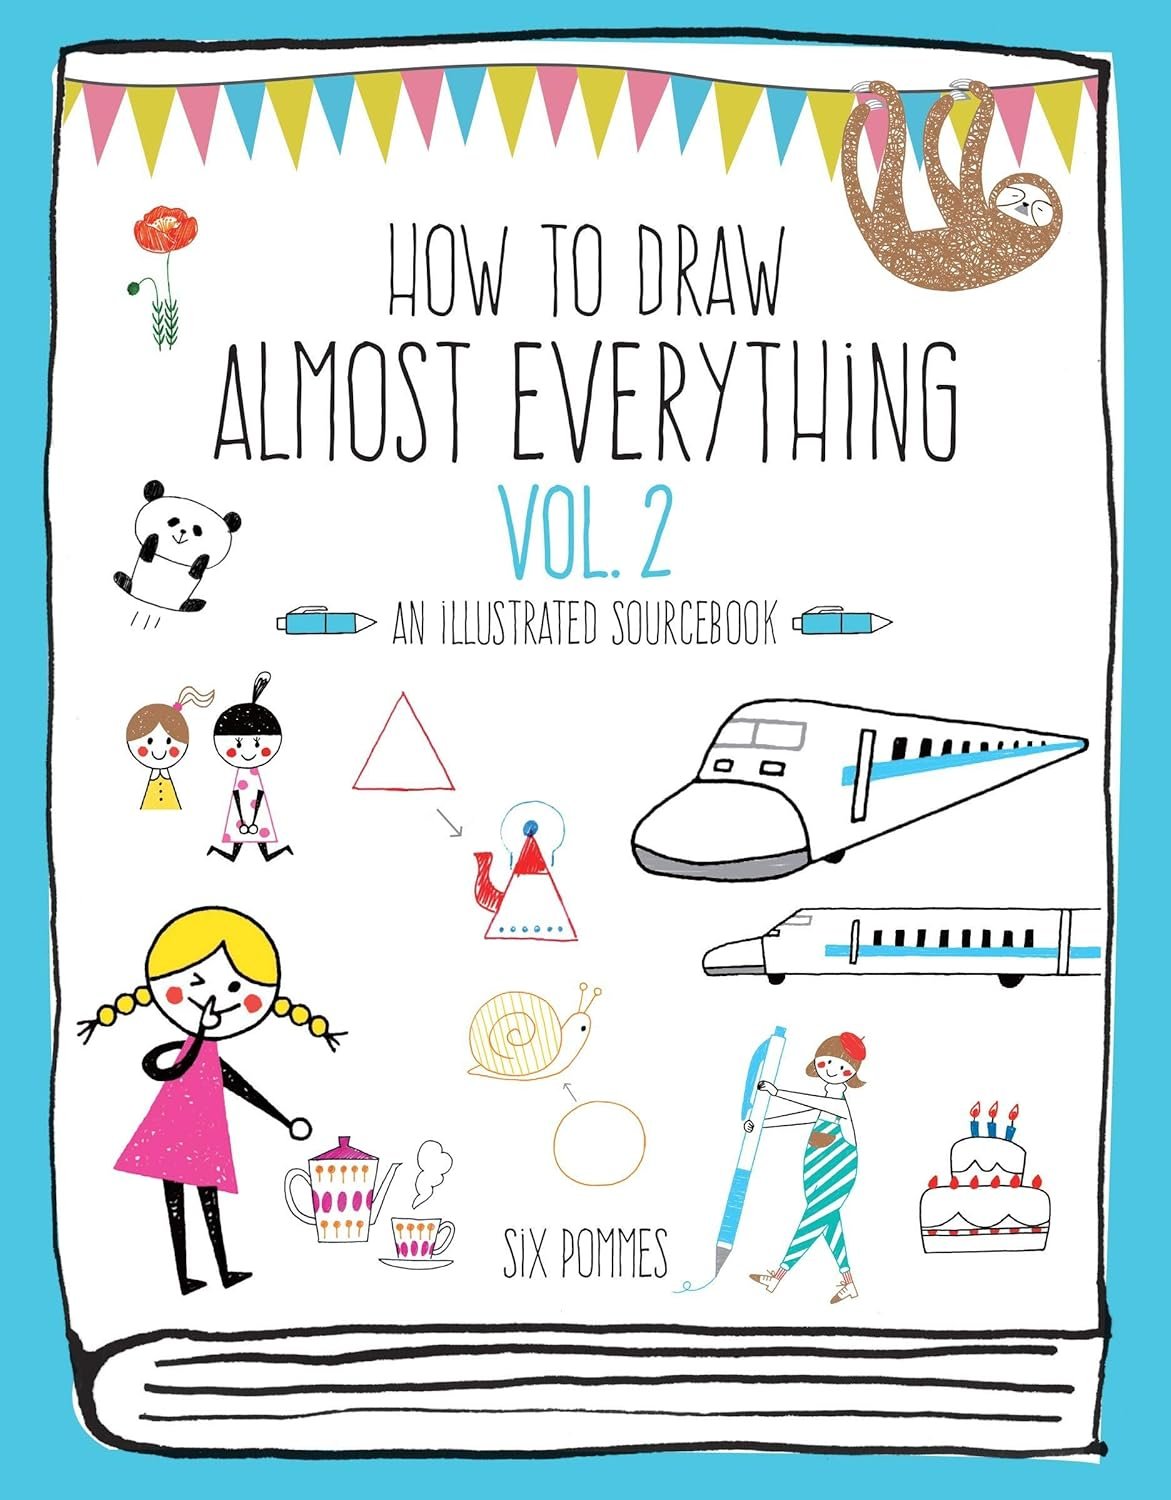 How to Draw Almost Everything Volume 2: An Illustrated Sourcebook